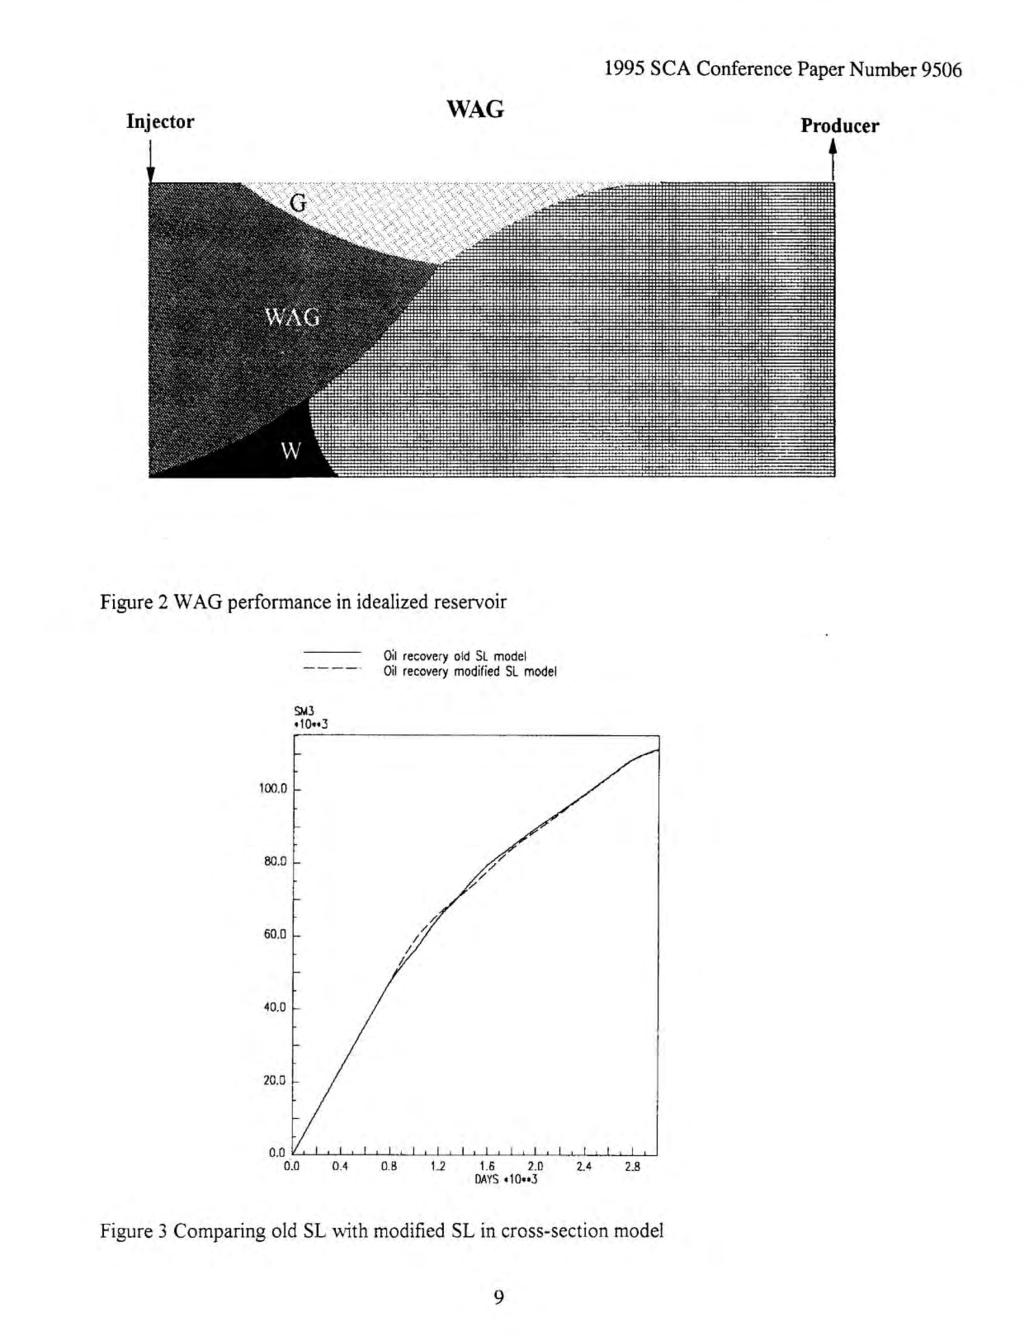 Injector WAG 1995 SCA Conference Paper Number 9506 Producer Figure 2 WAG performance in idealized reservoir Oil recovery old SL model